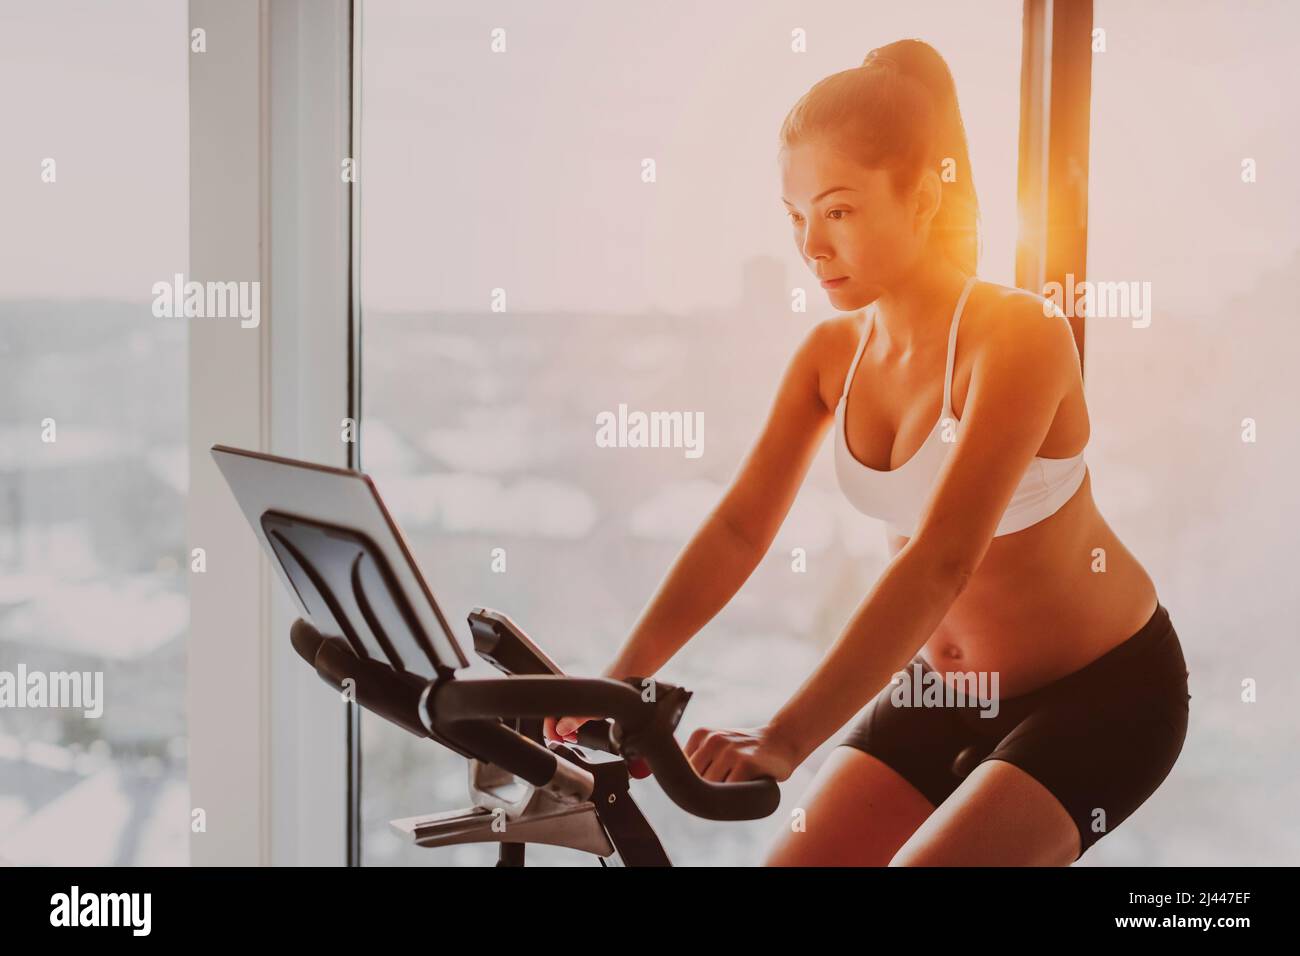 Exercise bike Asian woman training during pregnancy. Workout at home fitness gym watching online cycle class on stationary bicycle Stock Photo